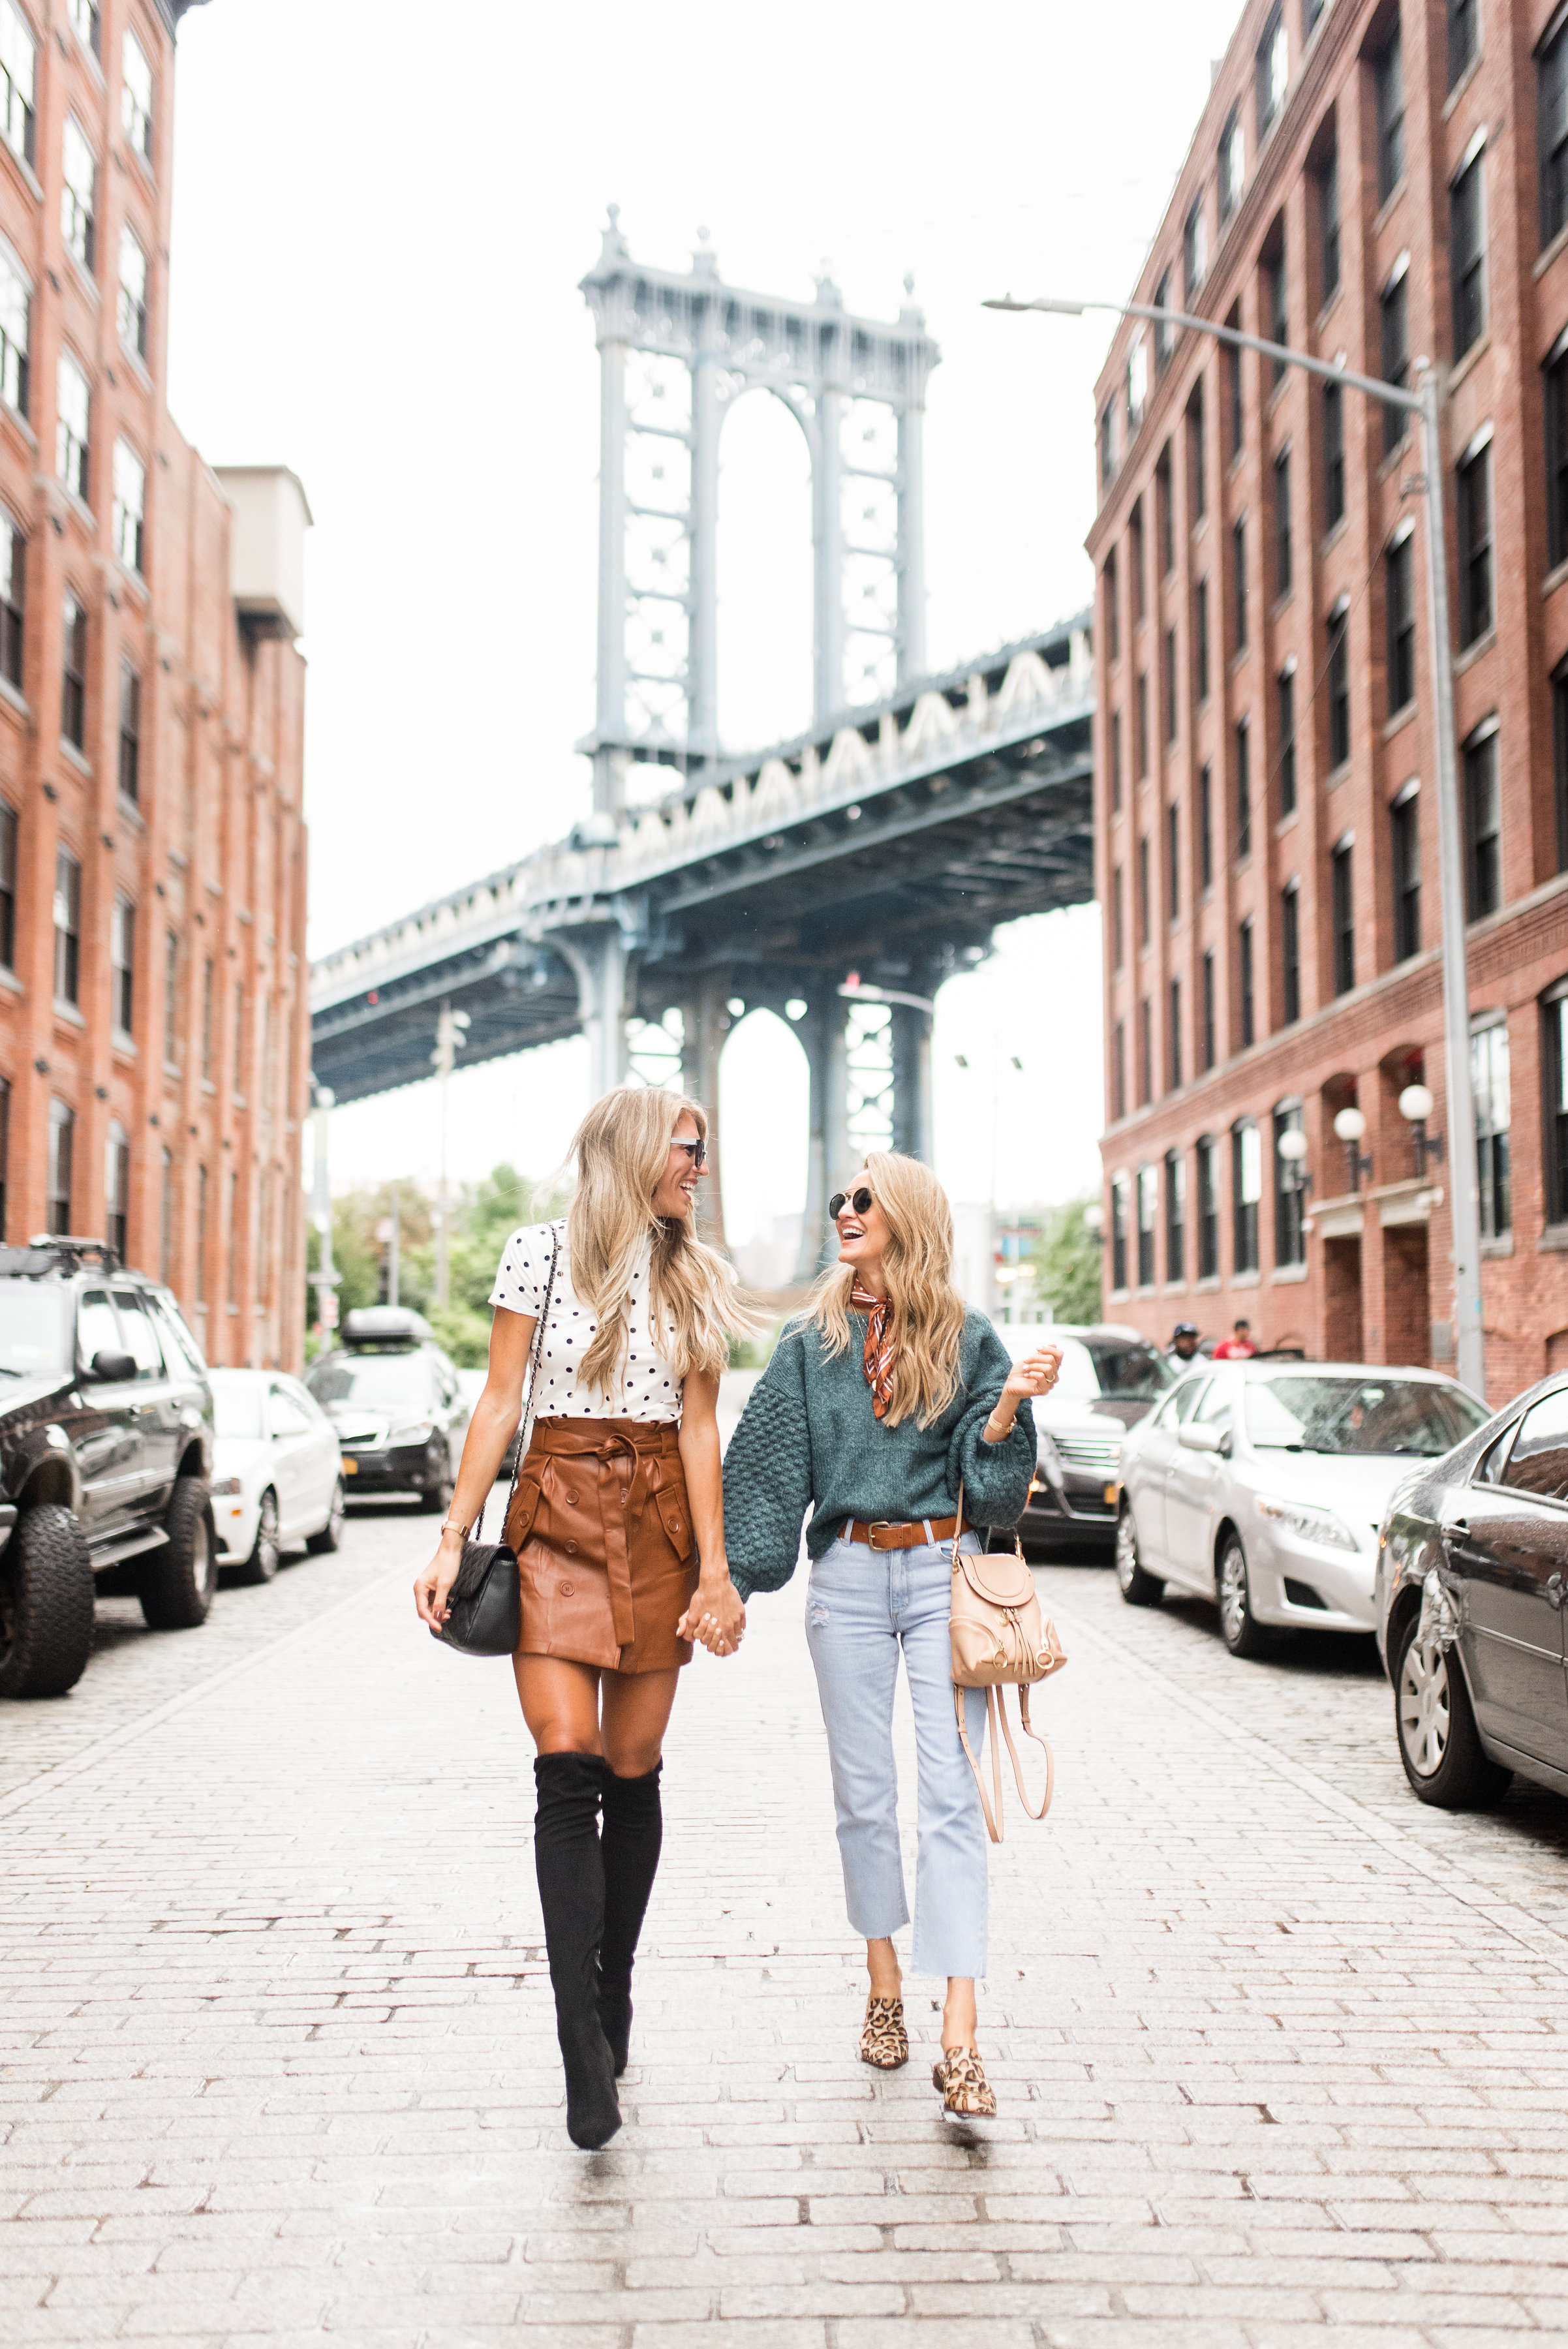 Brooklyn Bridge Dumbo My First NYFW as a lifestyle and fashion blogger Ashley Bell Tallblondebell